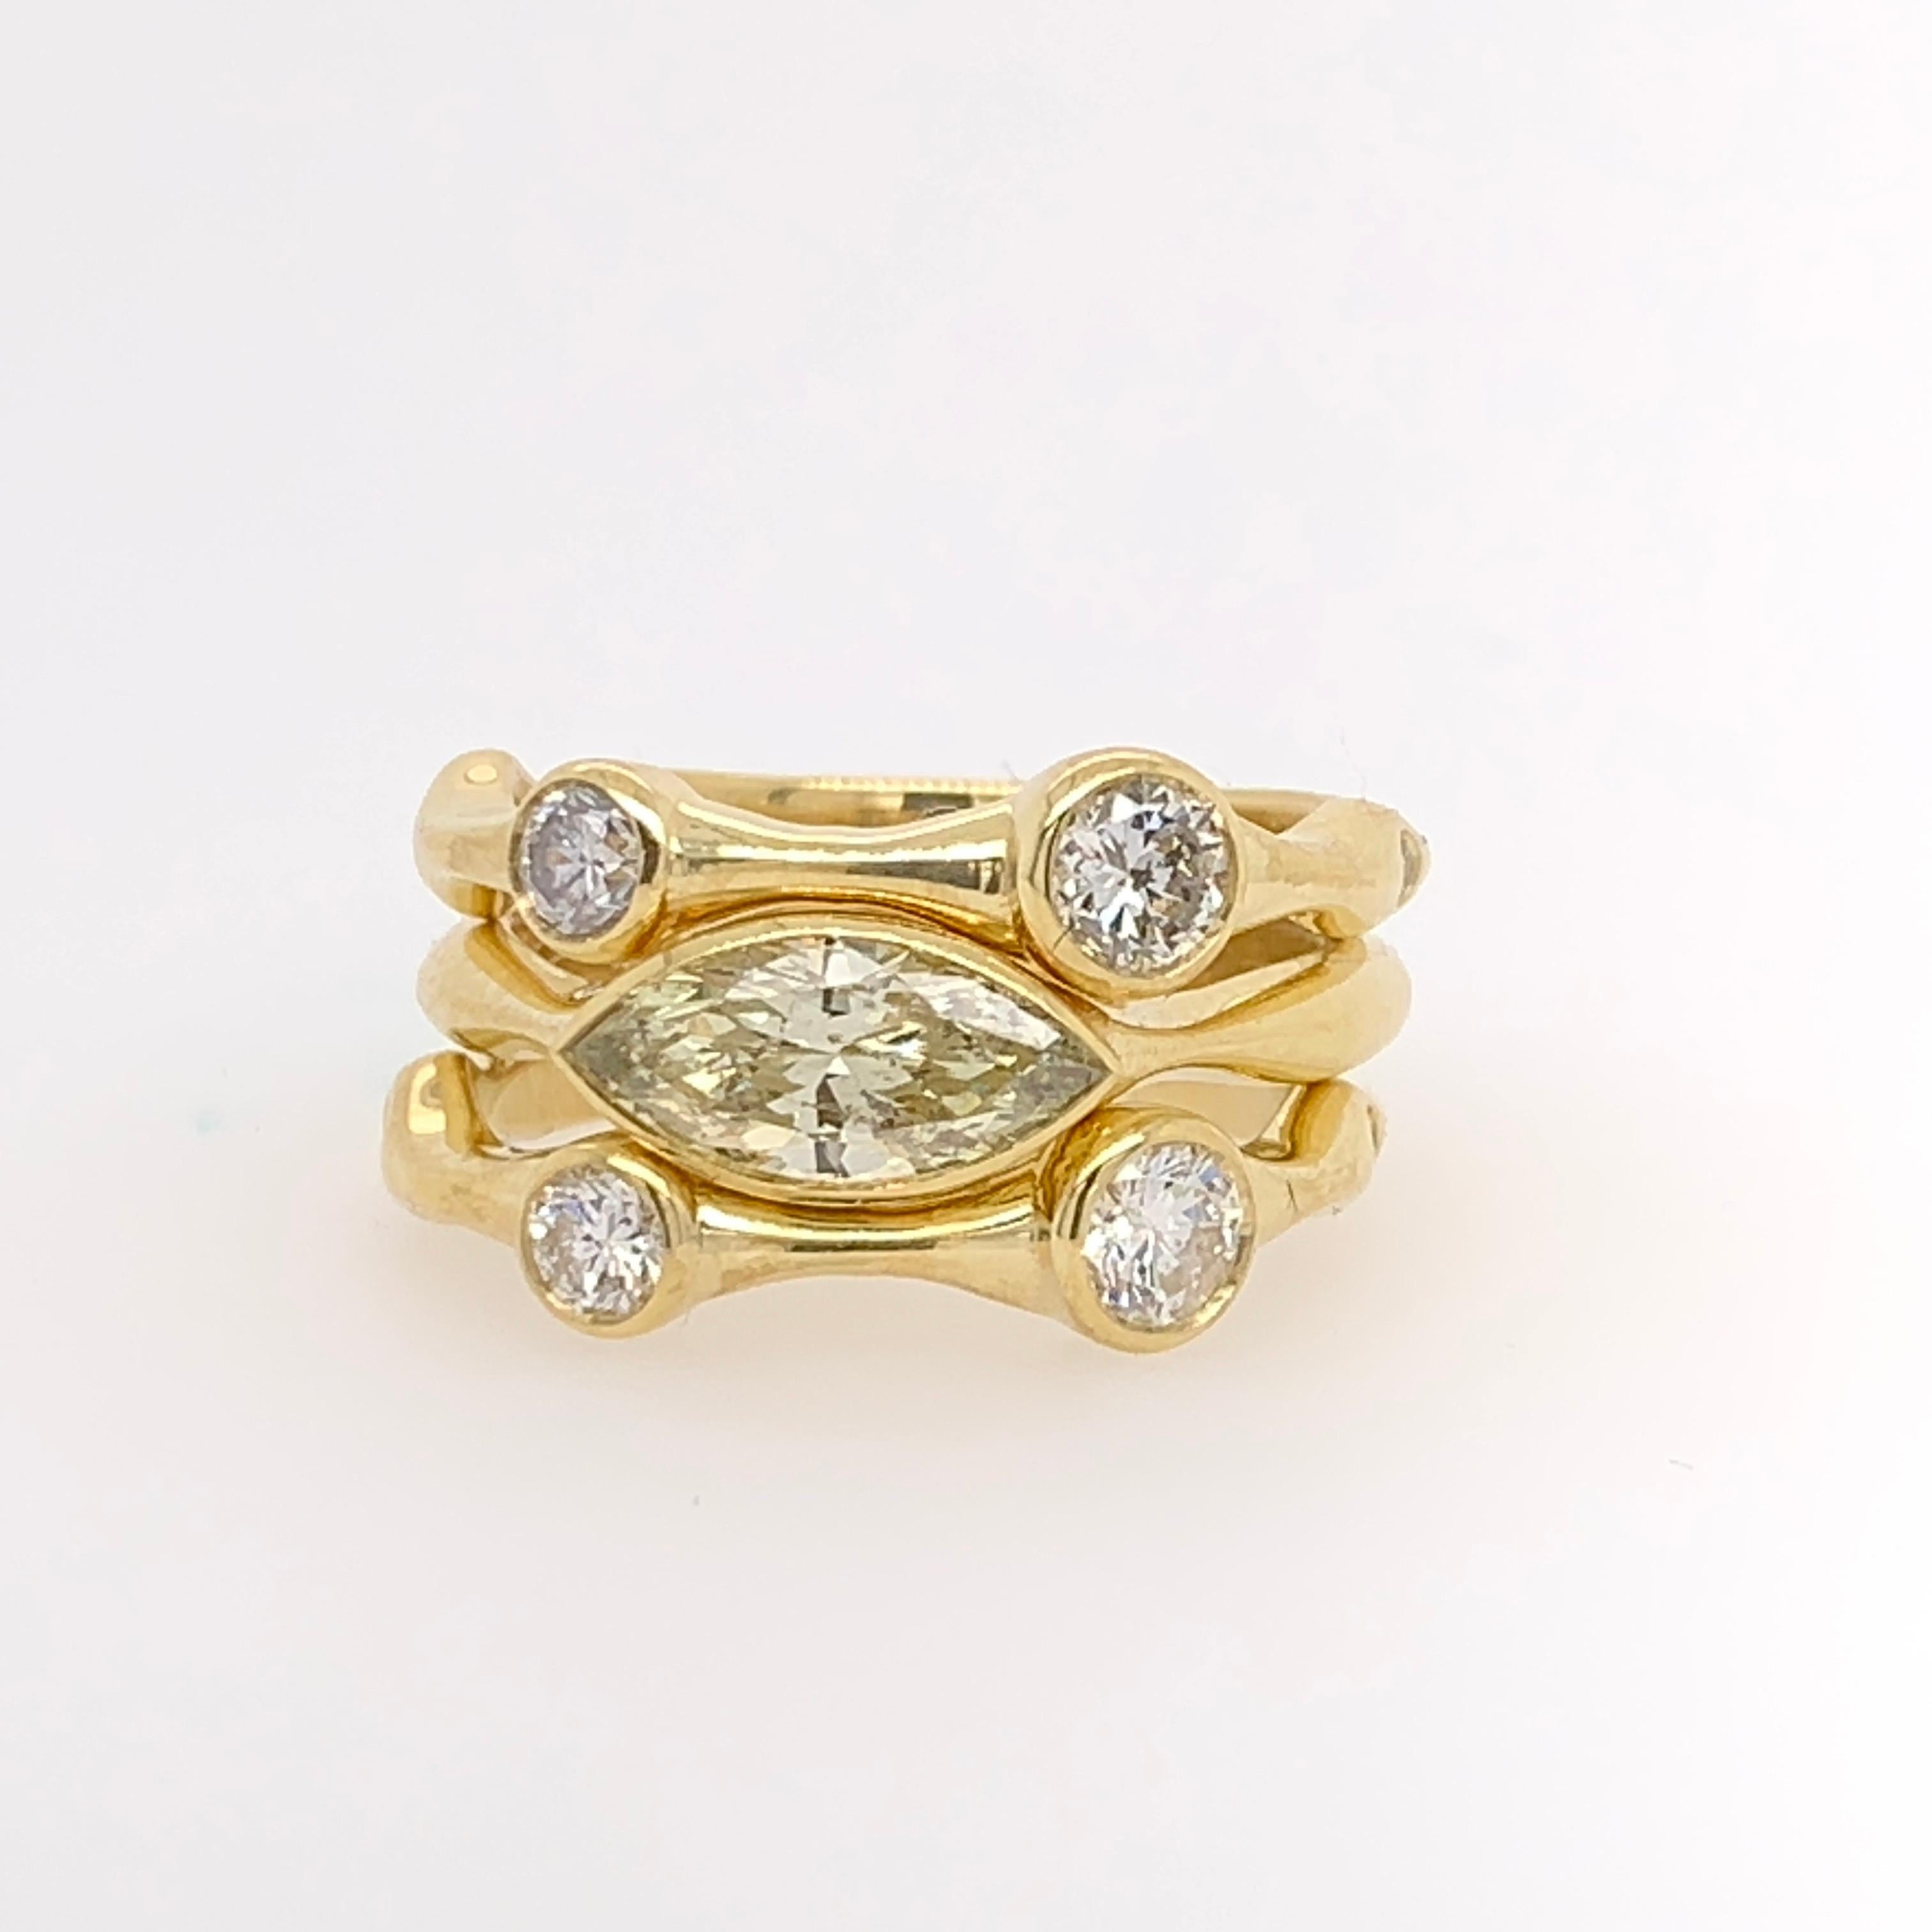 Stunning 18K Yellow Gold Natural Diamond Cocktail Stack Ring Set. The rings are size 5.25 and weigh 10.02 grams.

The center ring is set with a natural light yellow marquise diamond weighing 0.75cts (10.2x4.6x2.7mm). The clarity is approximately SI2